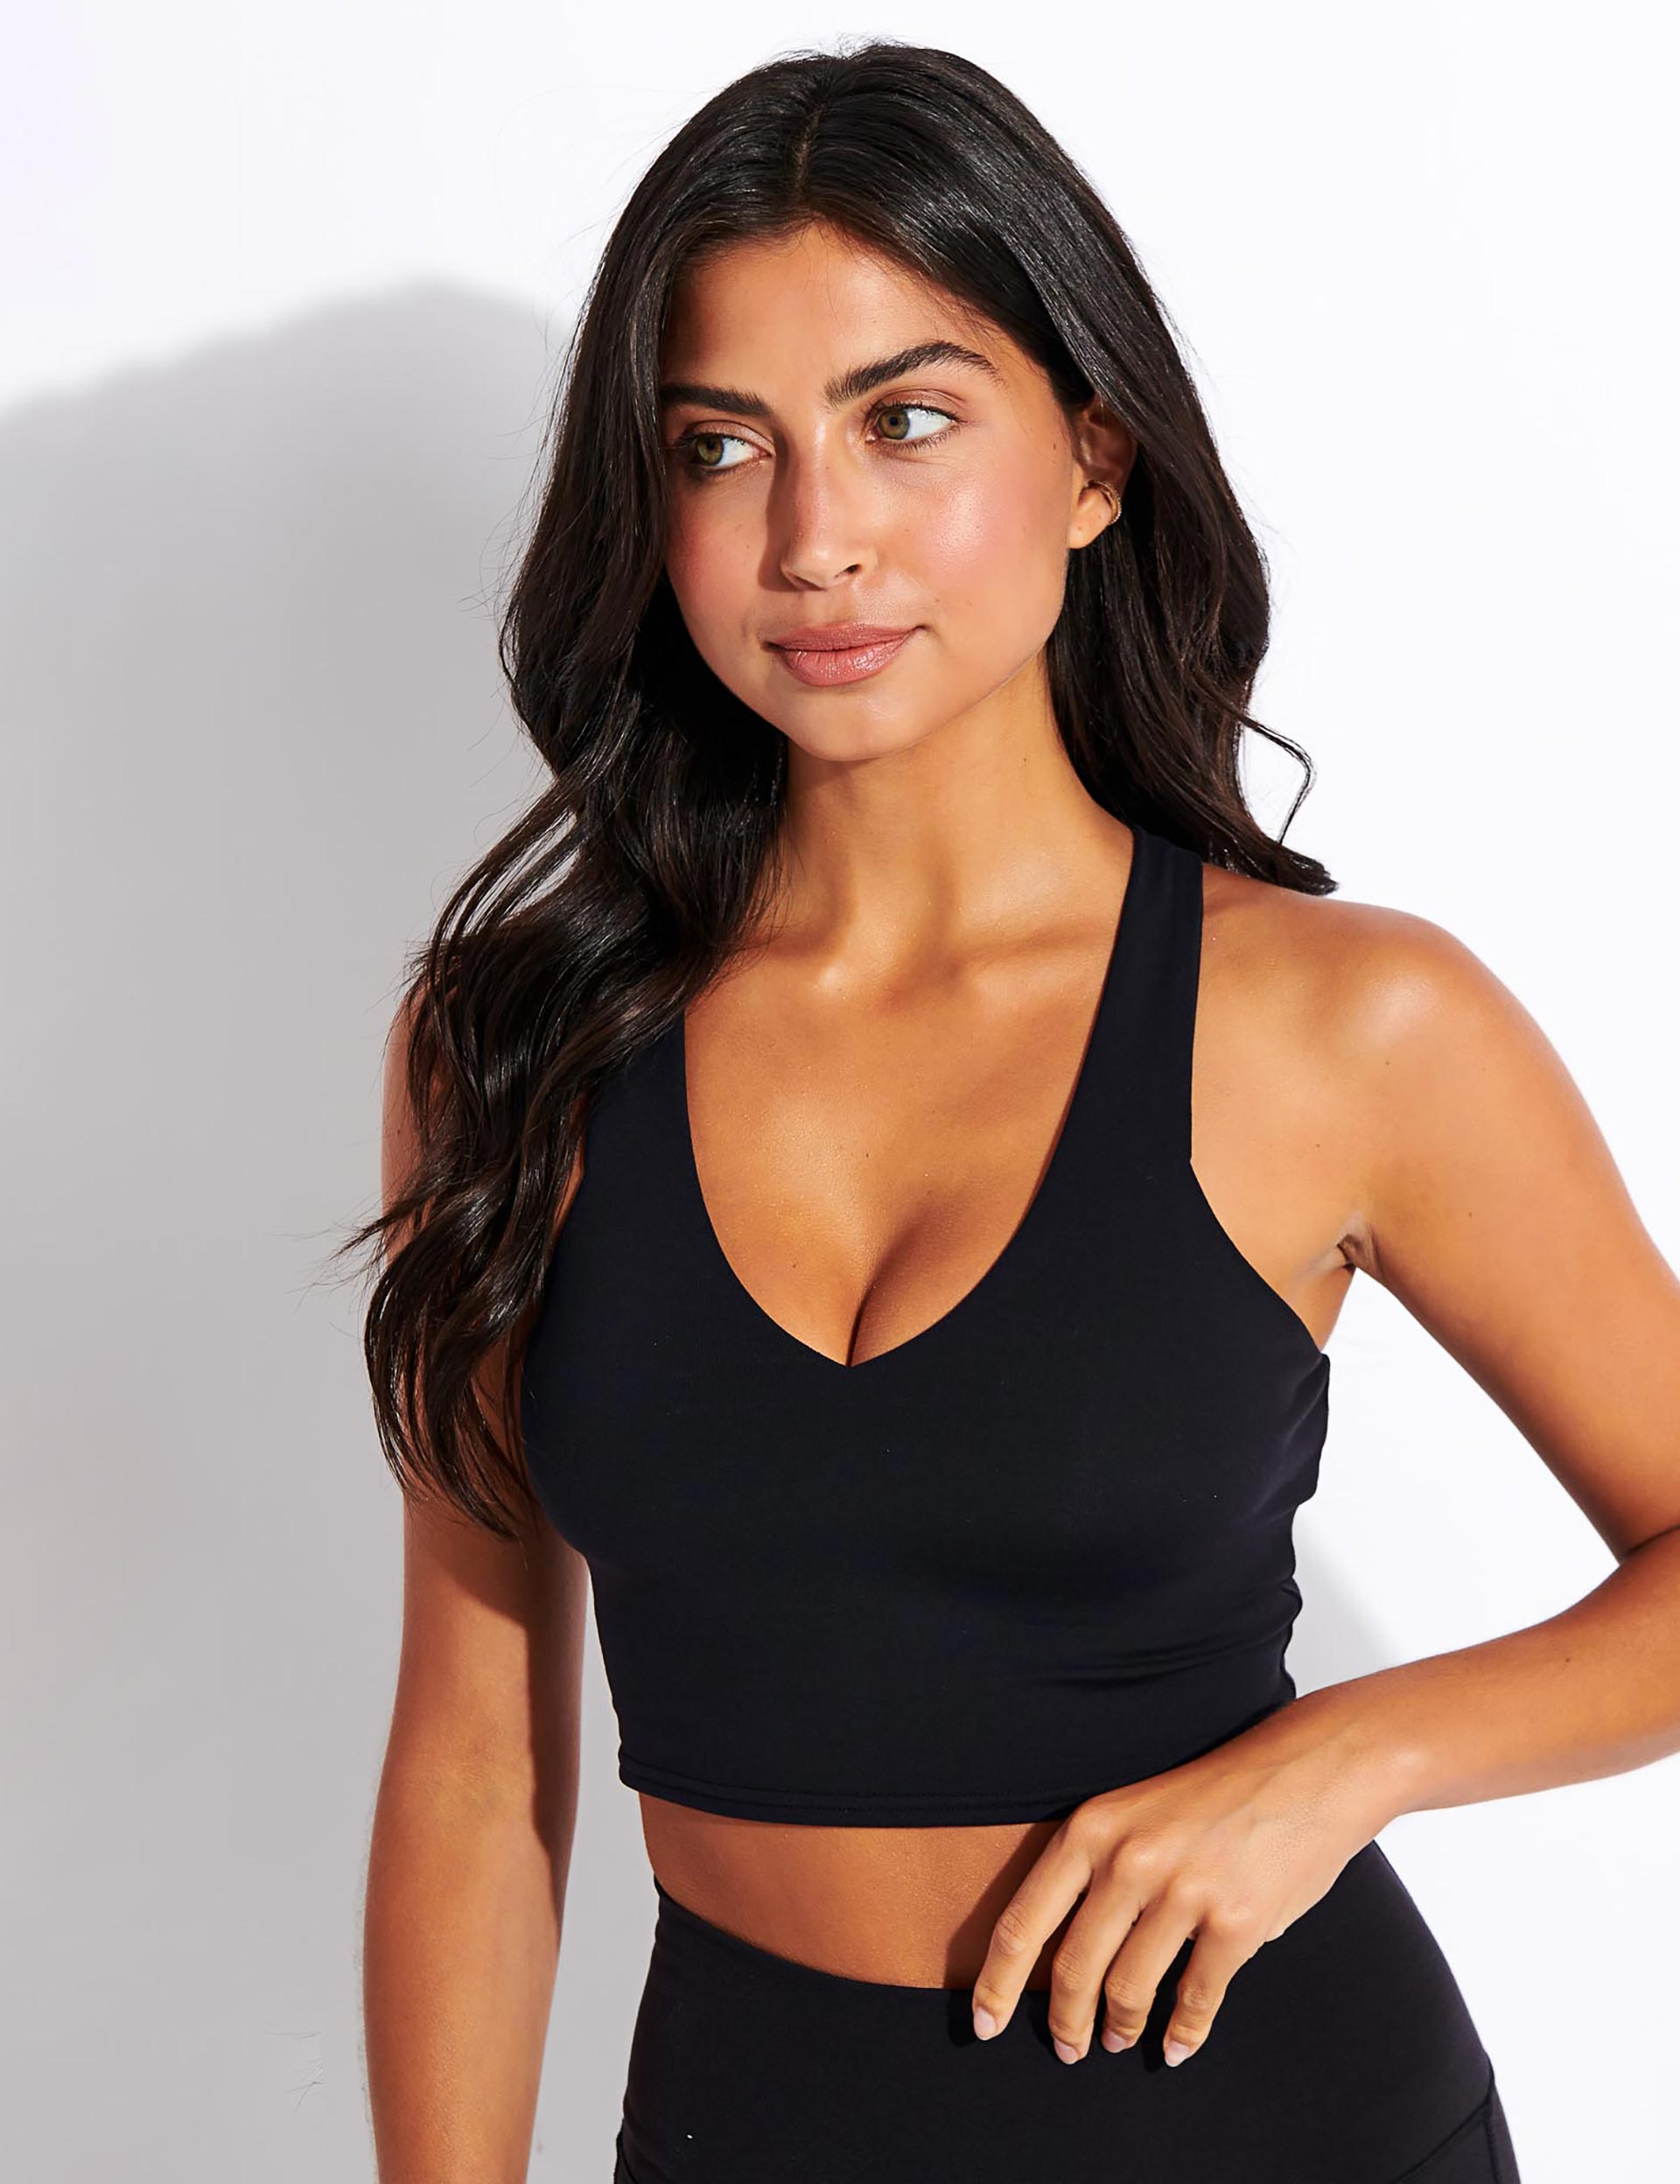 A Cropped Top: Alo Airbrush Real Bra Tank